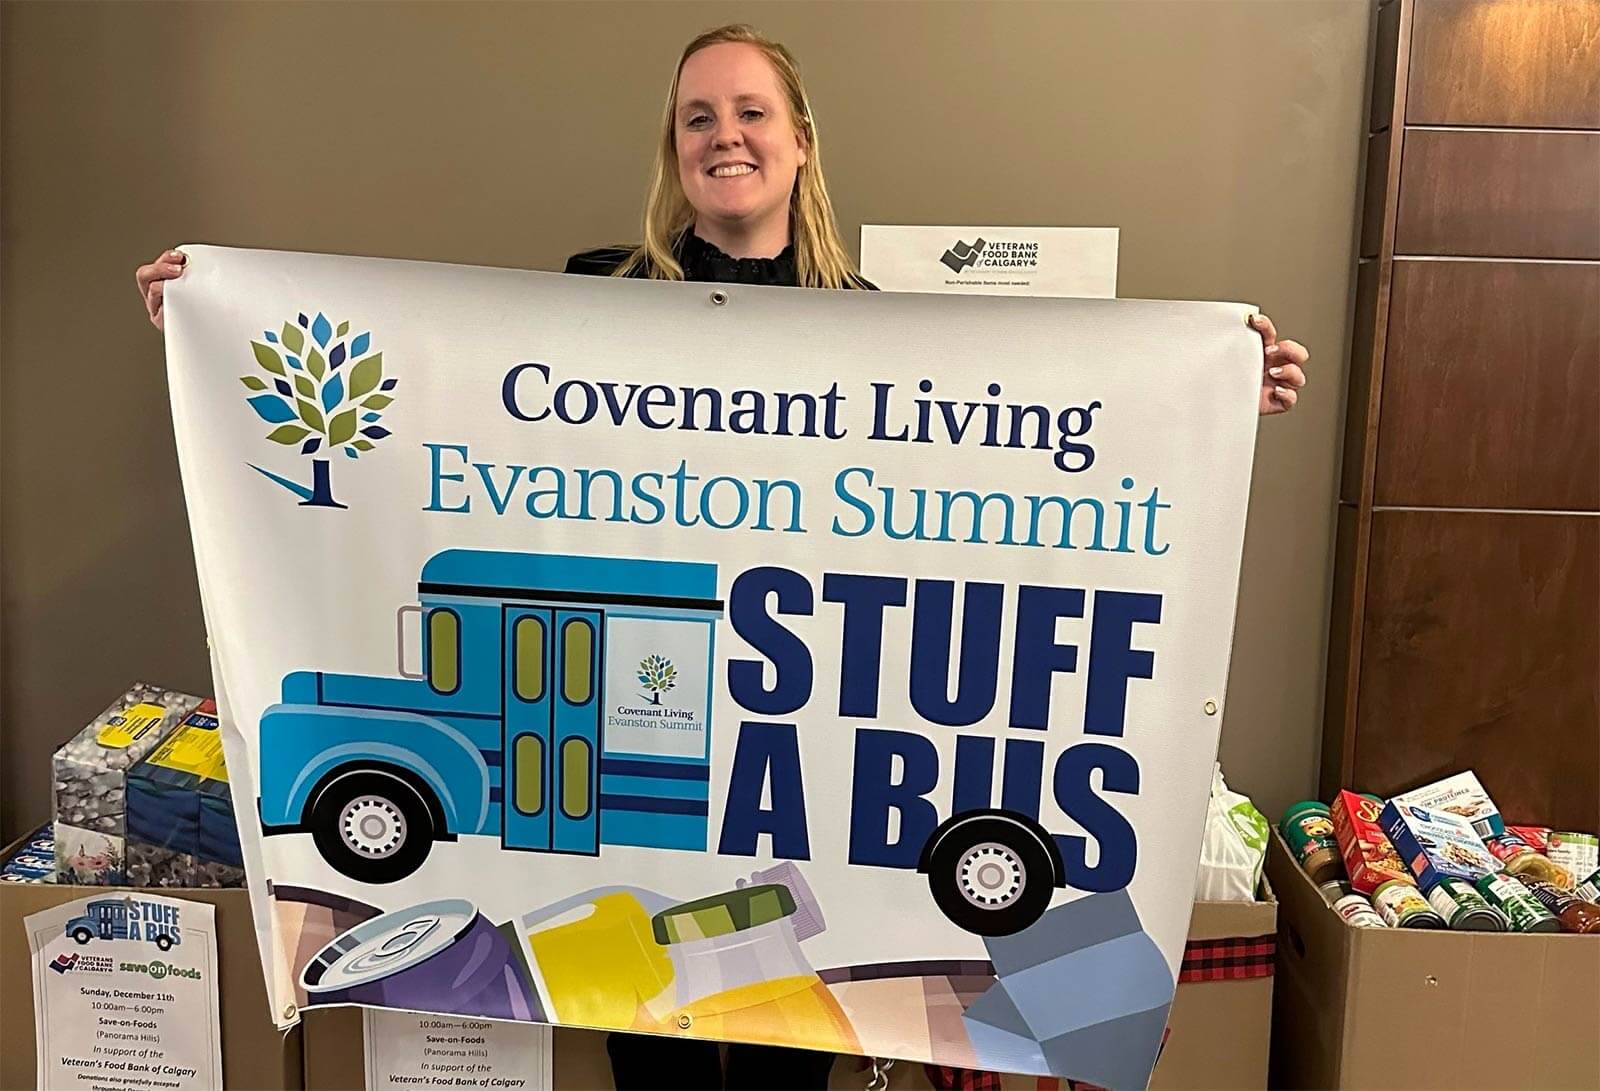 A woman holds up a sign for Evanston Summit's Stuff A Bus food drive